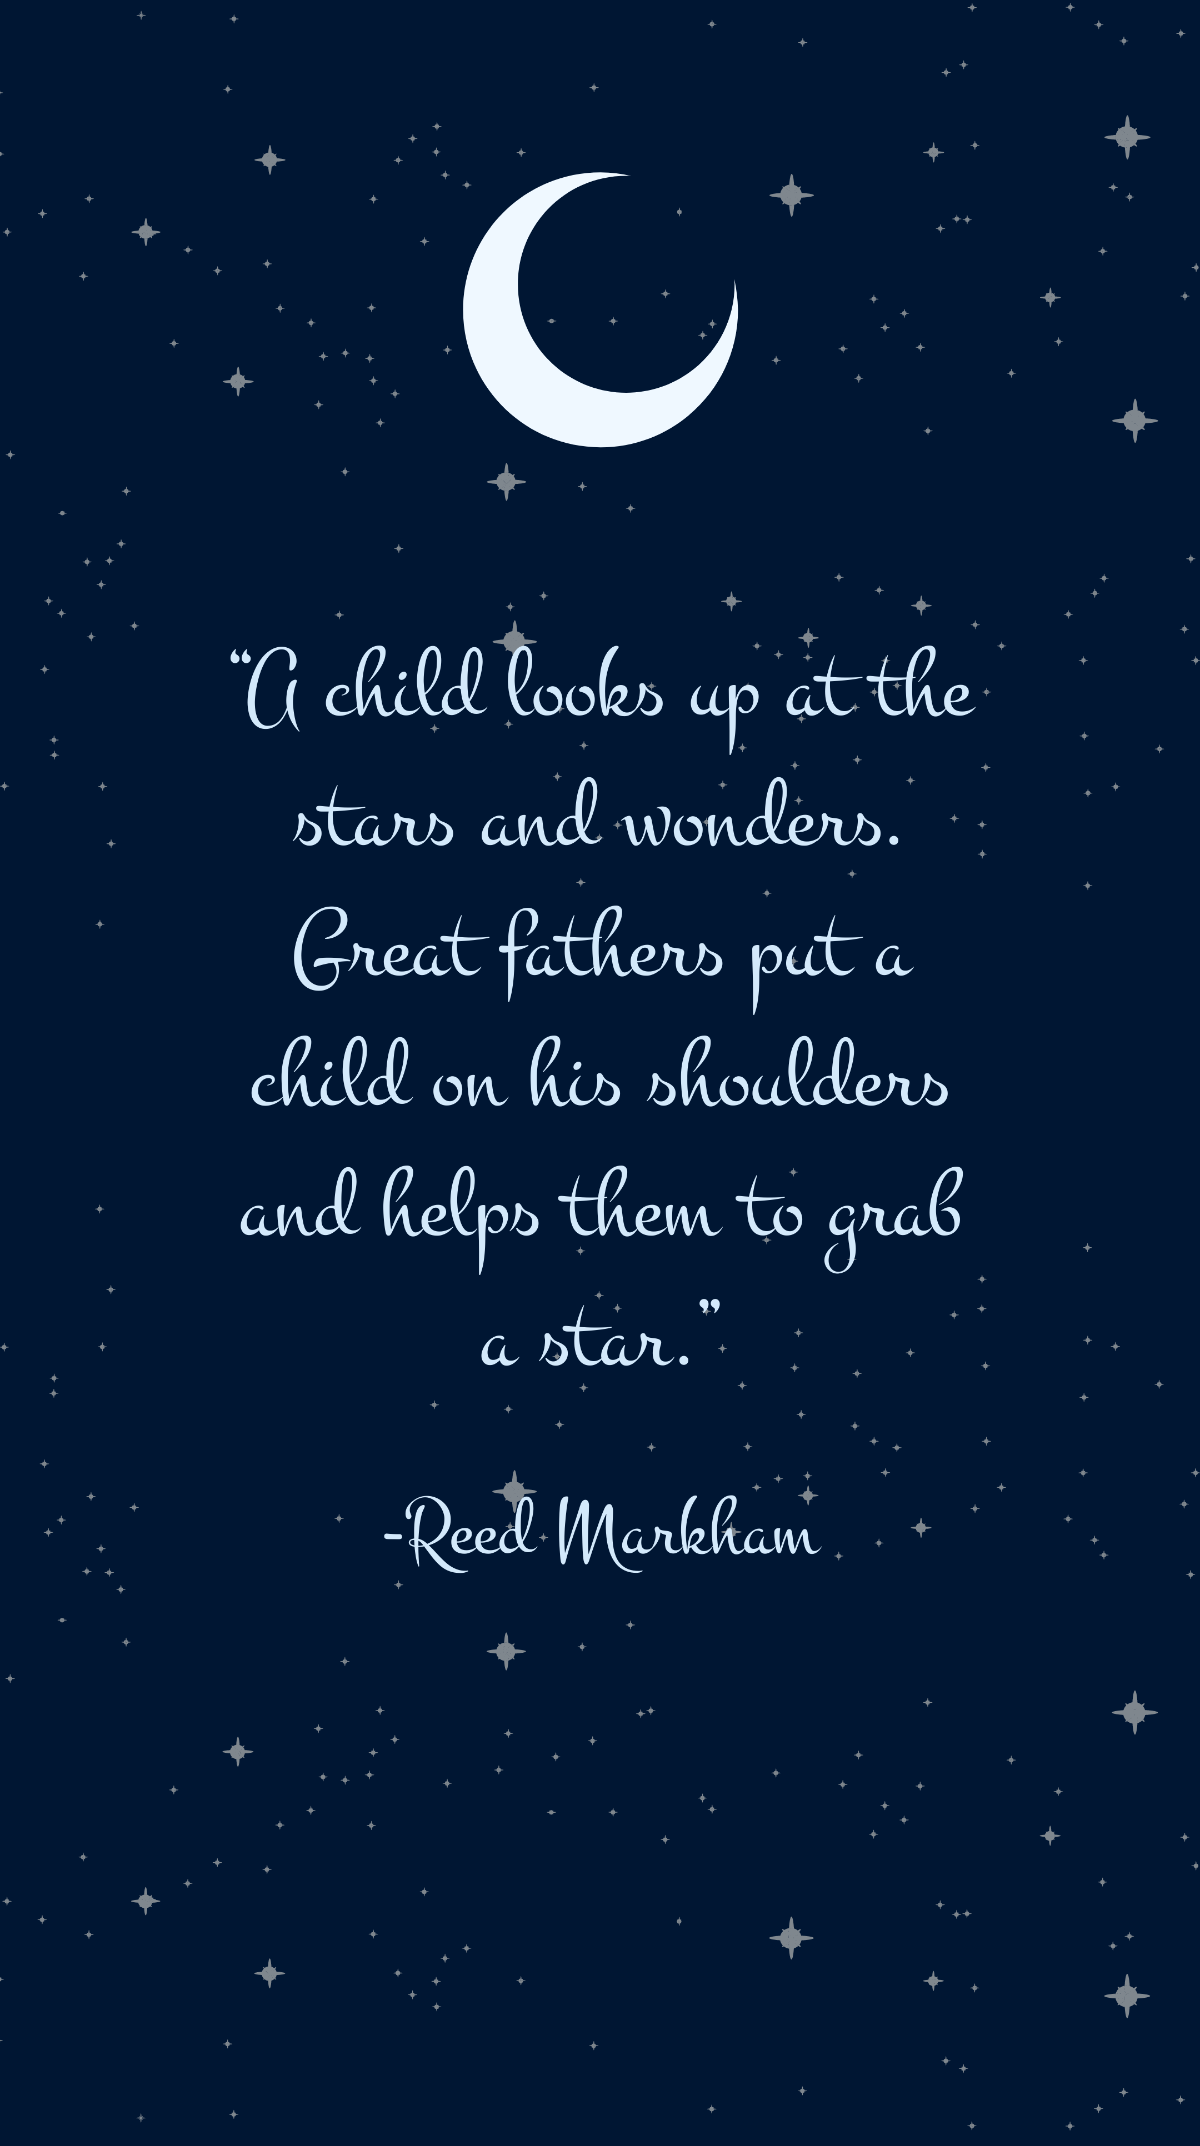 Reed Markham - A child looks up at the stars and wonders. Great fathers put a child on his shoulders and helps them to grab a star. Template